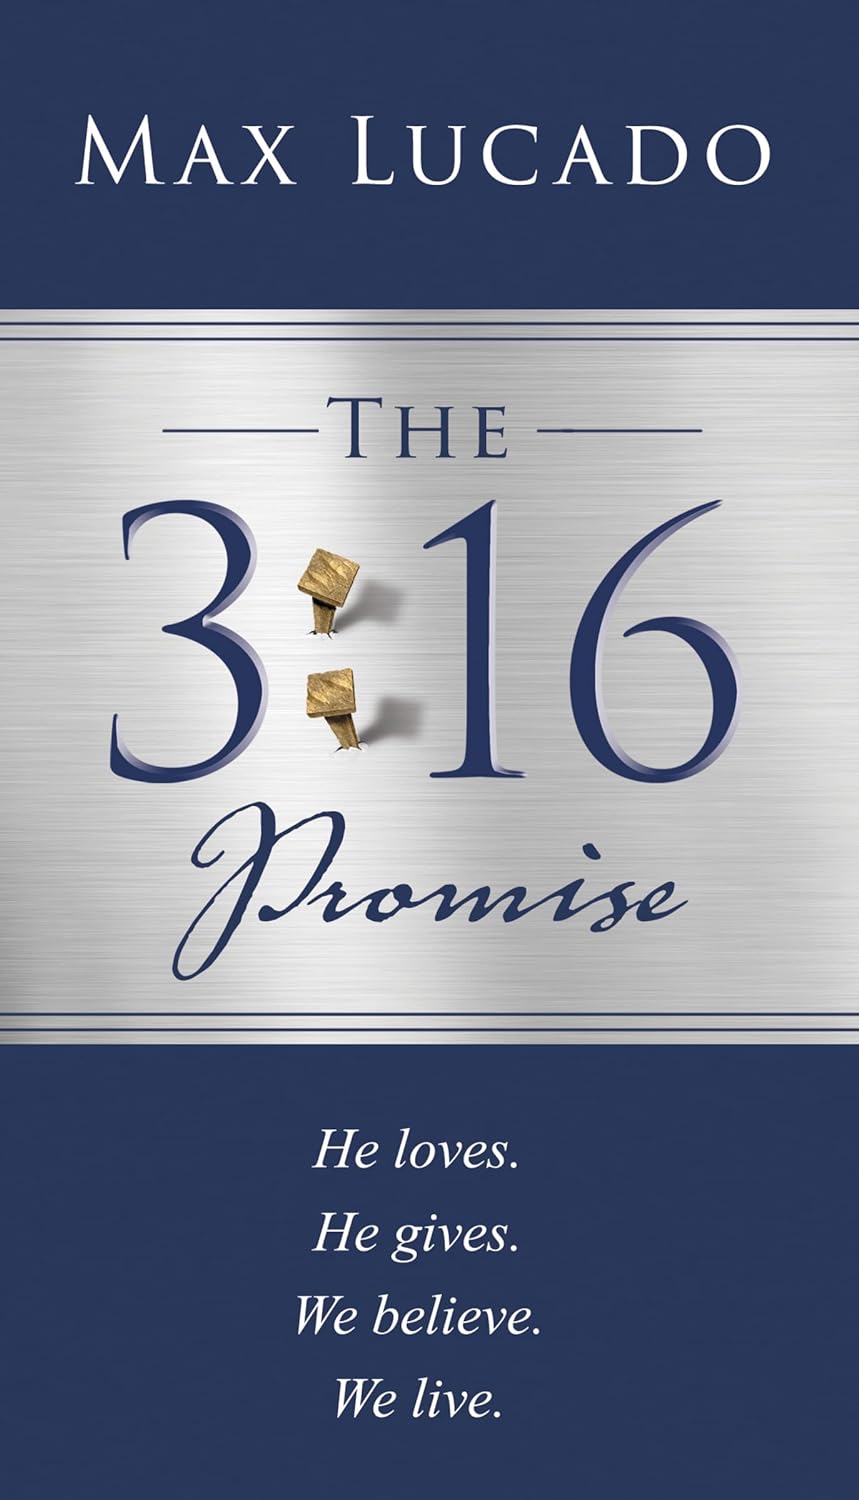 The 3:16 Promise (booklet) - Max Lucado